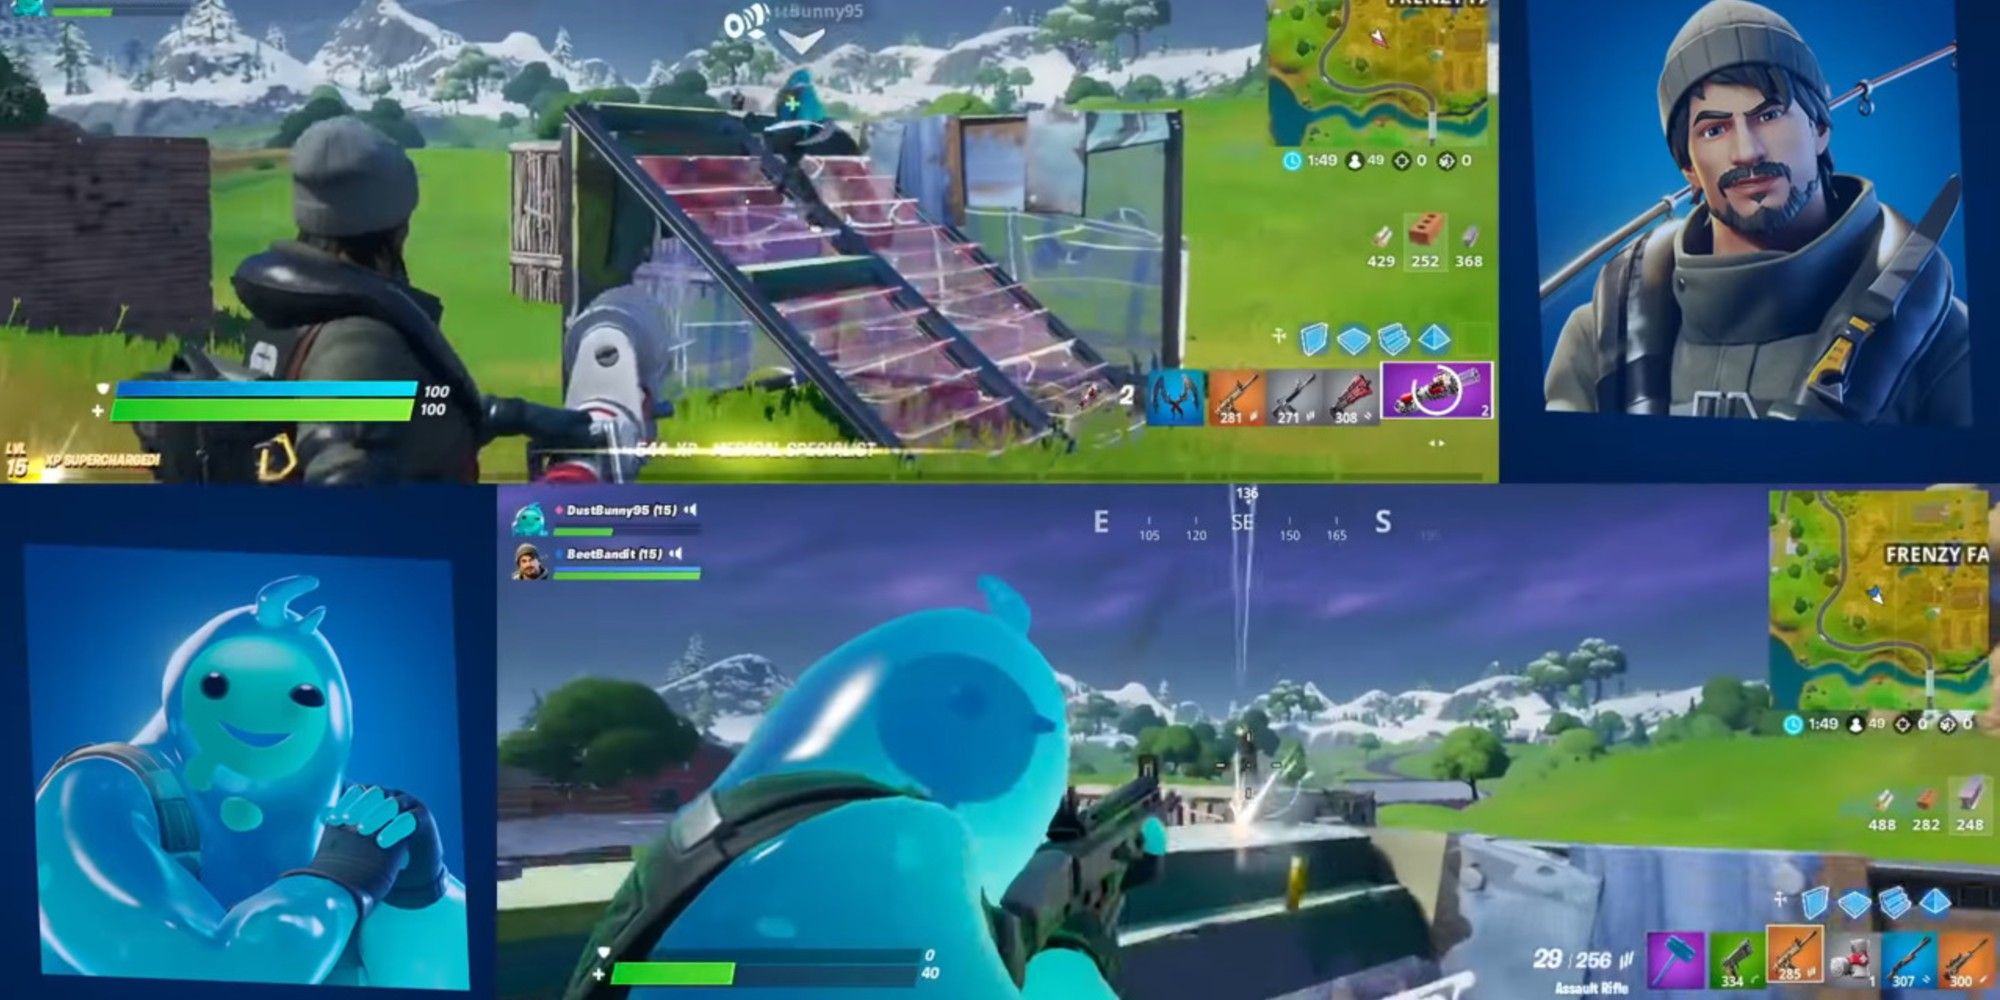 Can You Play Split Screen In Fortnite On Switch Fortnite How To Set Up Split Screen Play Screen Rant